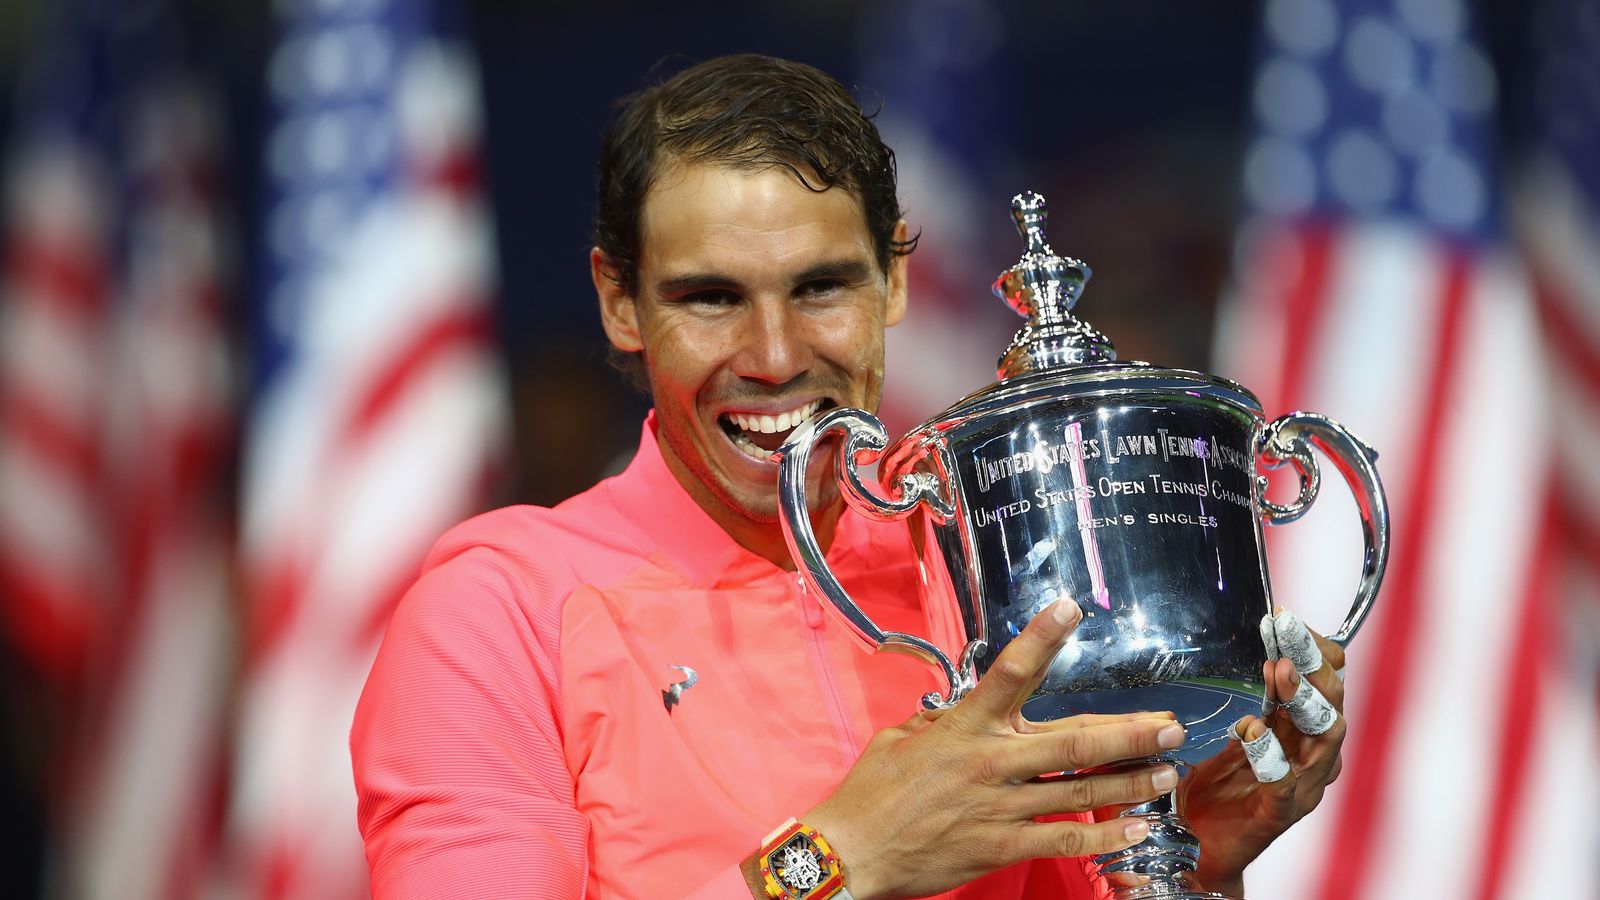 Rafael Nadal beats Kevin Anderson to win the US Open final Tennis